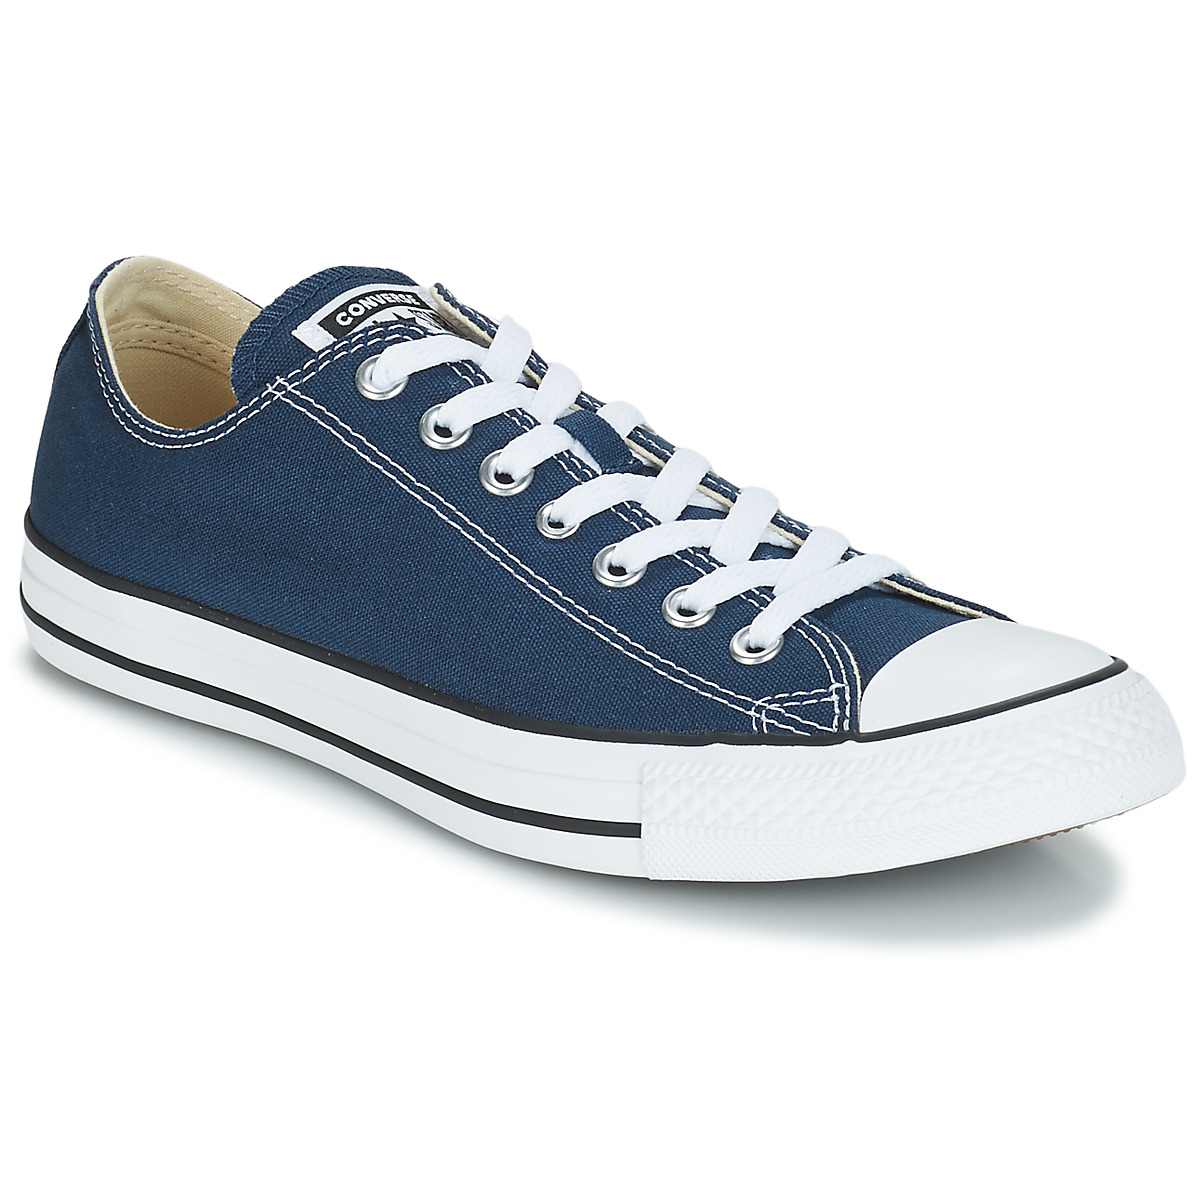 Converse Chuck Taylor All Star Sneakers Laag Unisex - Navy - Maat 43